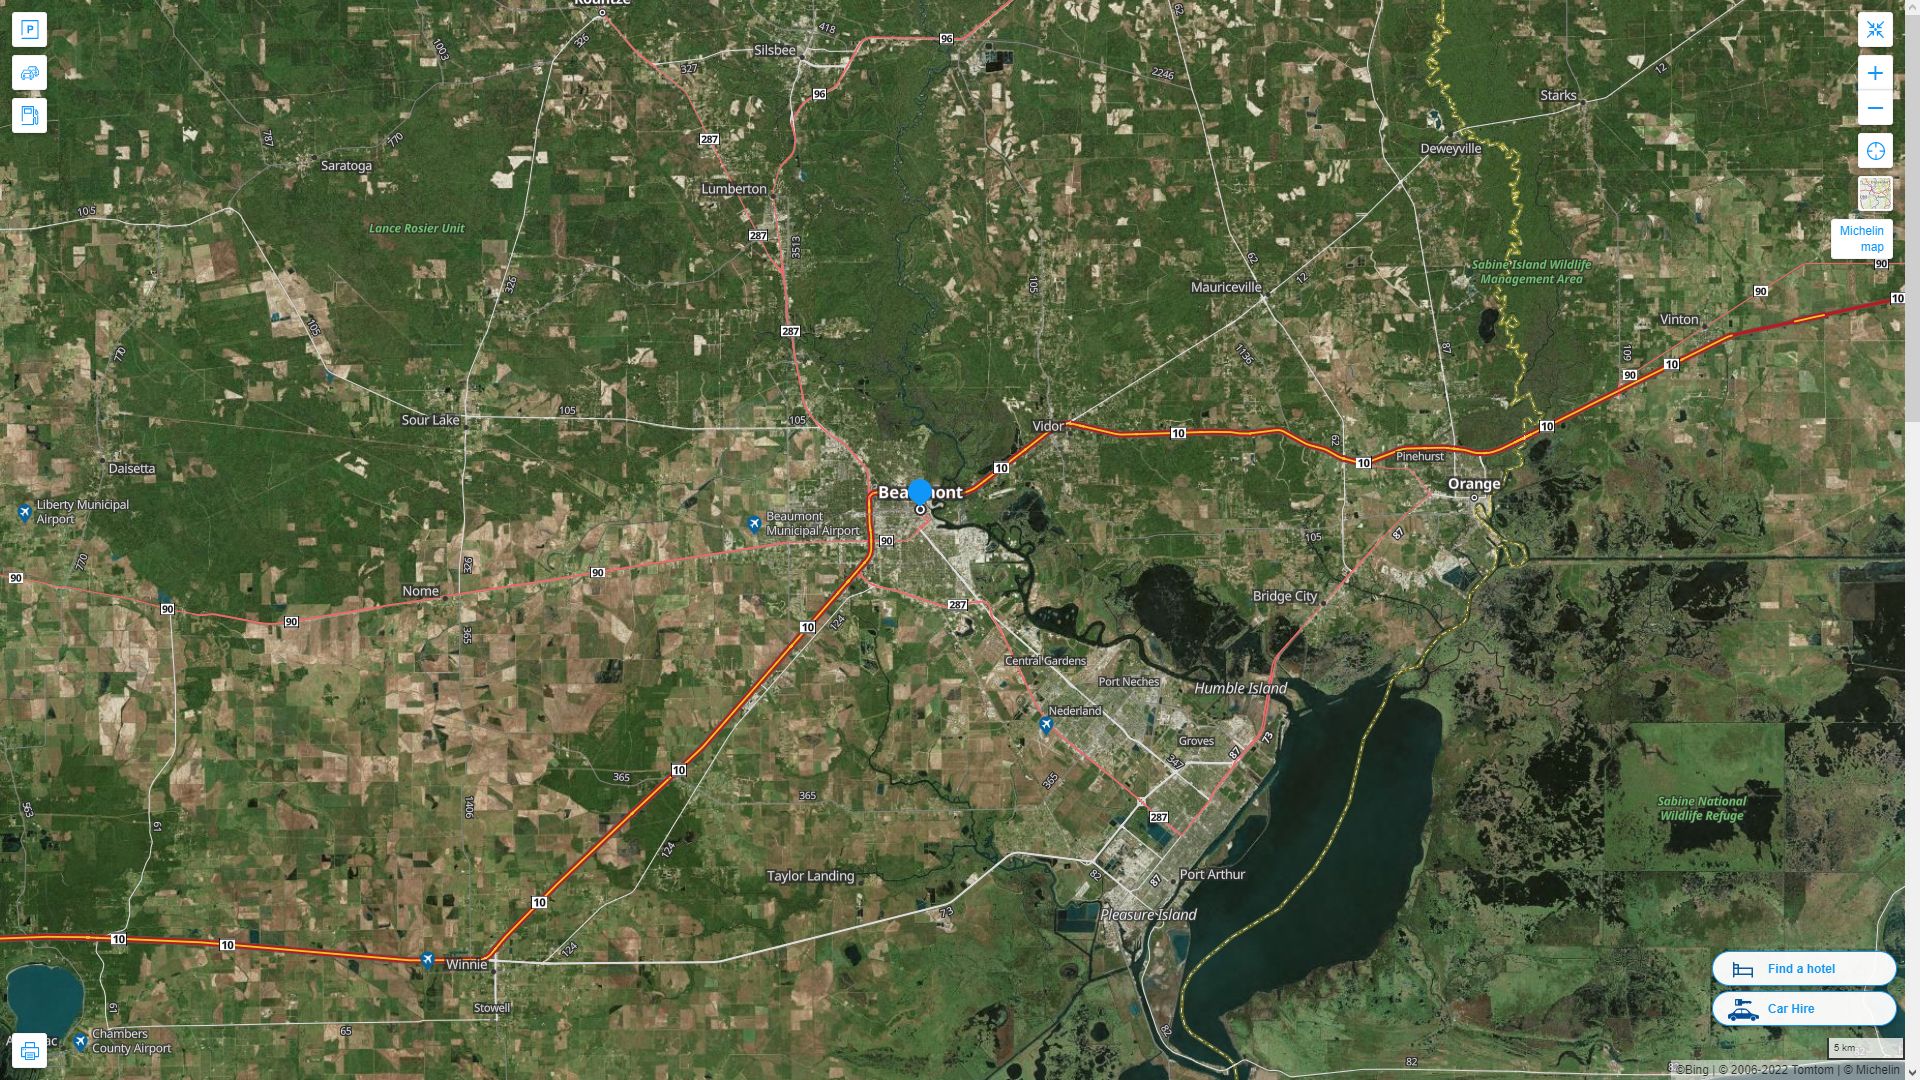 Beaumont Texas Highway and Road Map with Satellite View